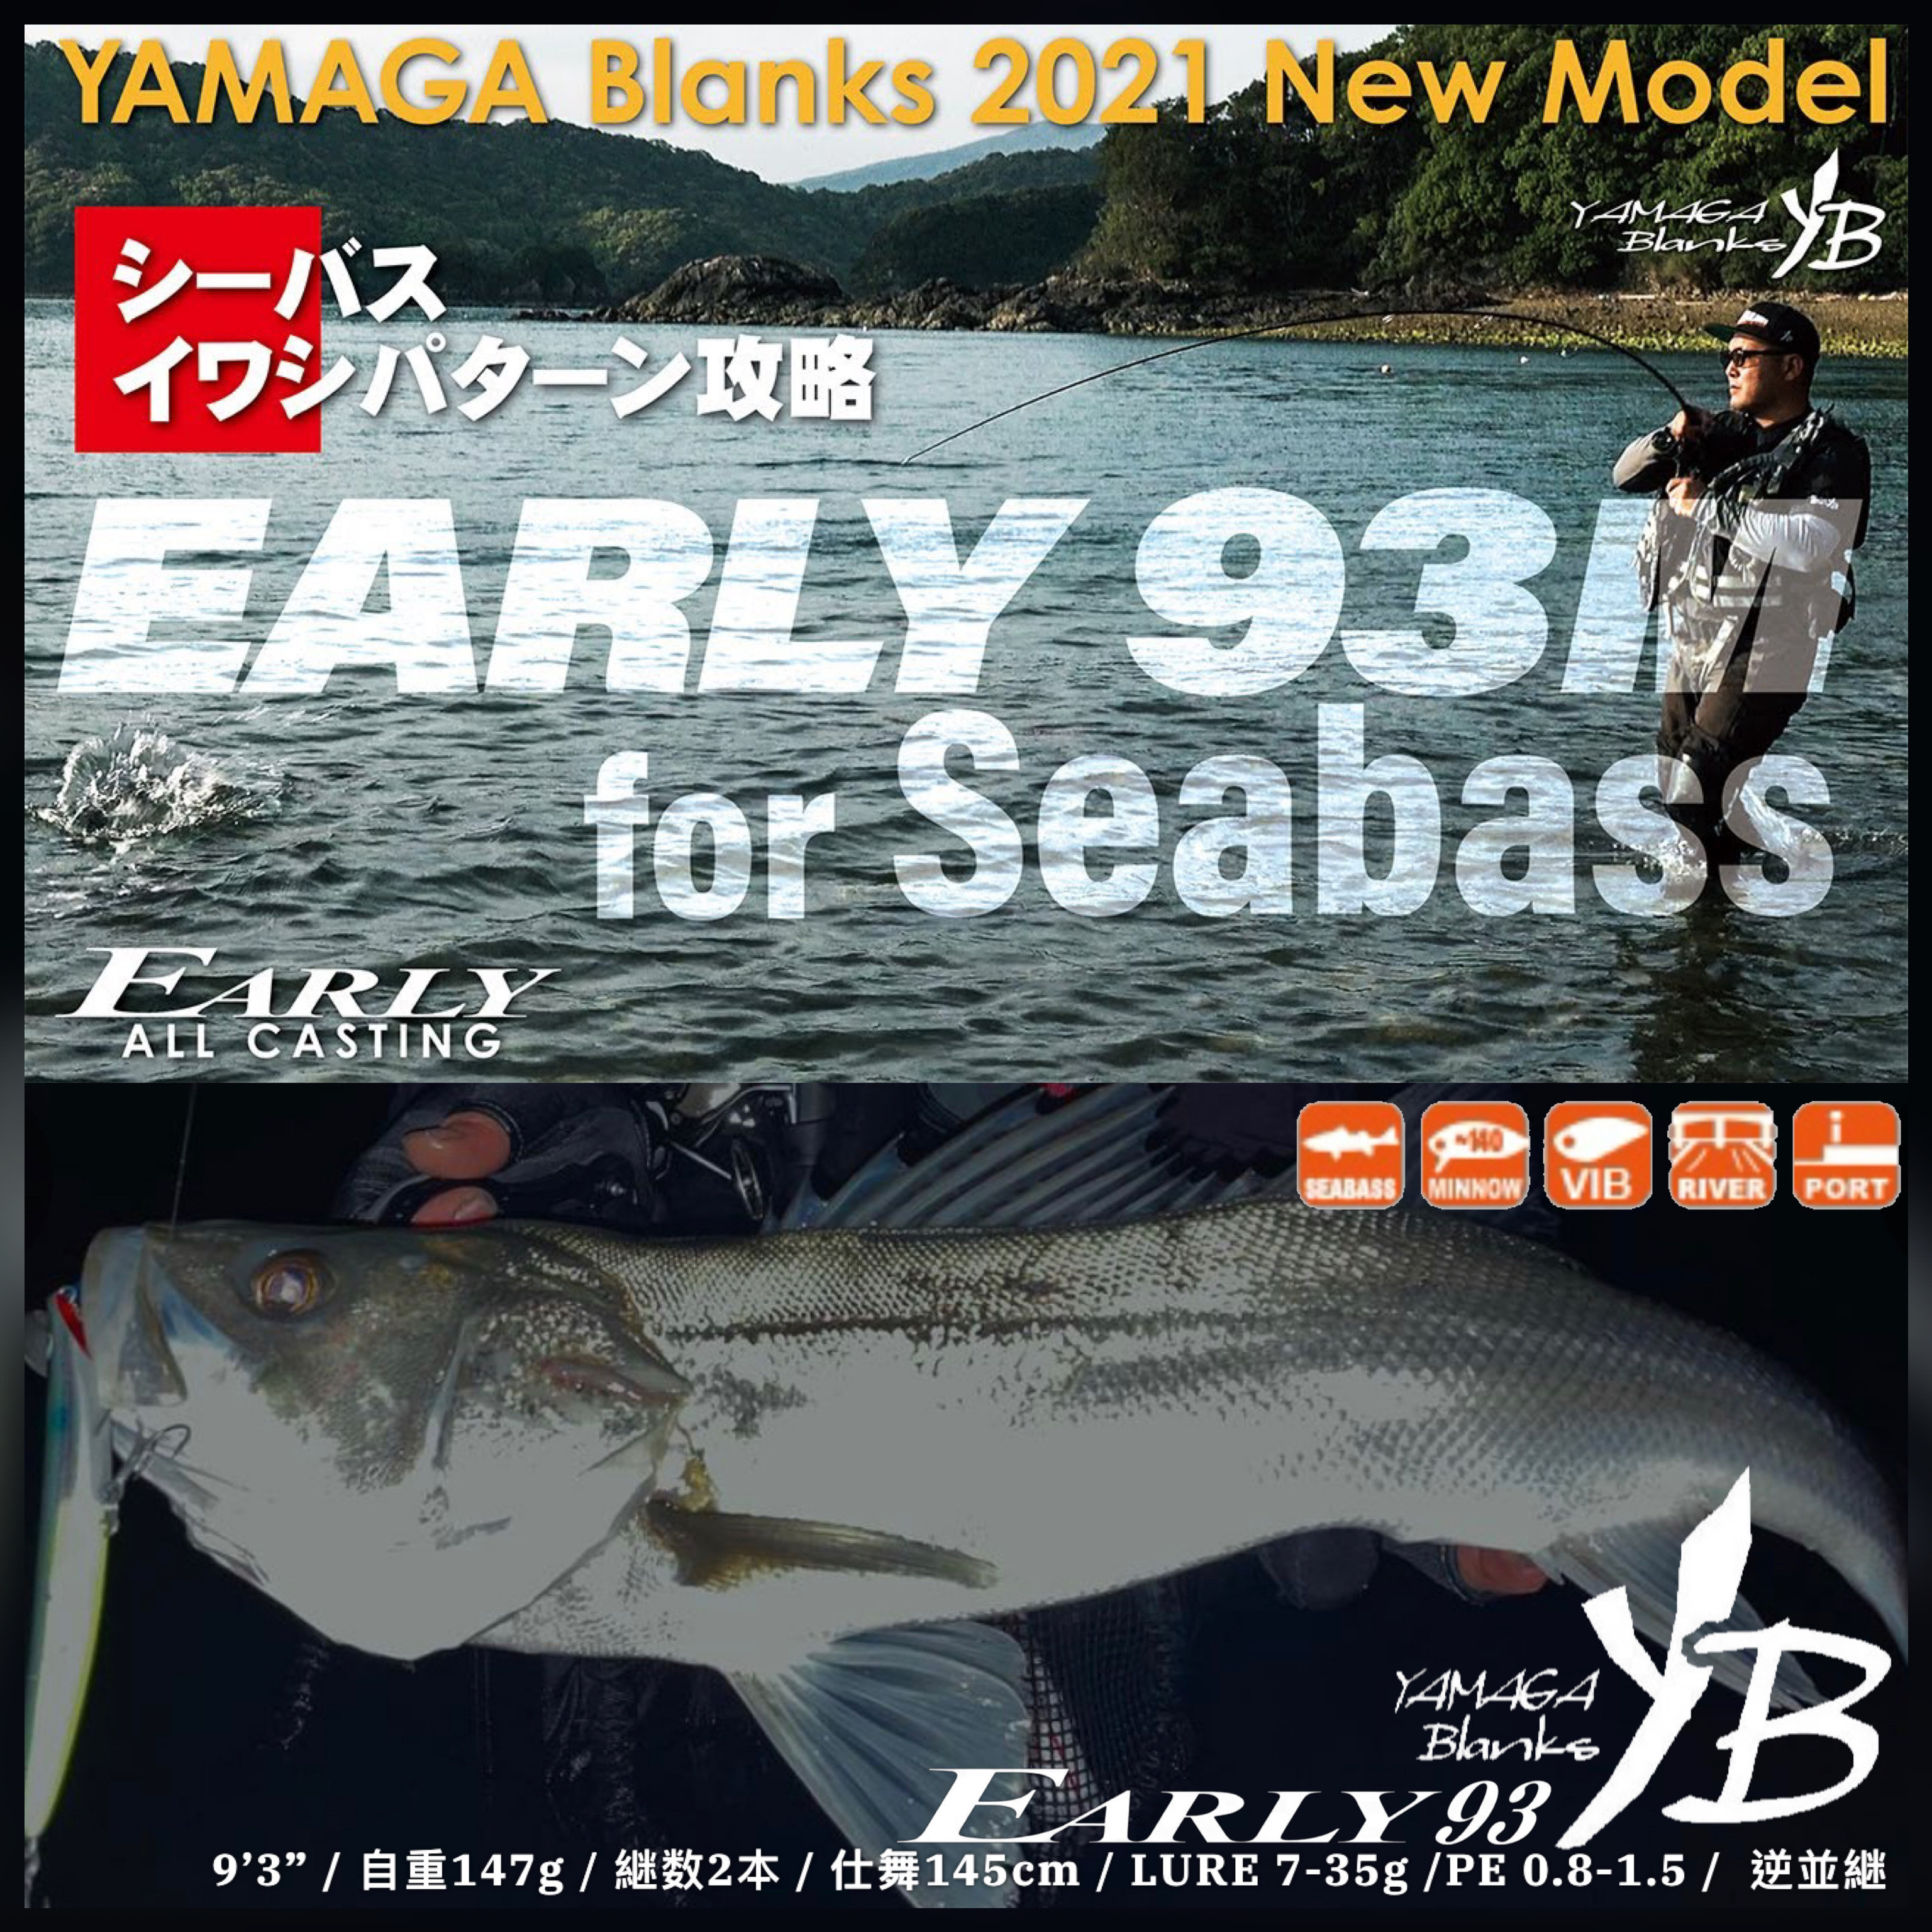 EARLY 93M for Seabass 保証書付推奨ルアー各種シーバスルアー